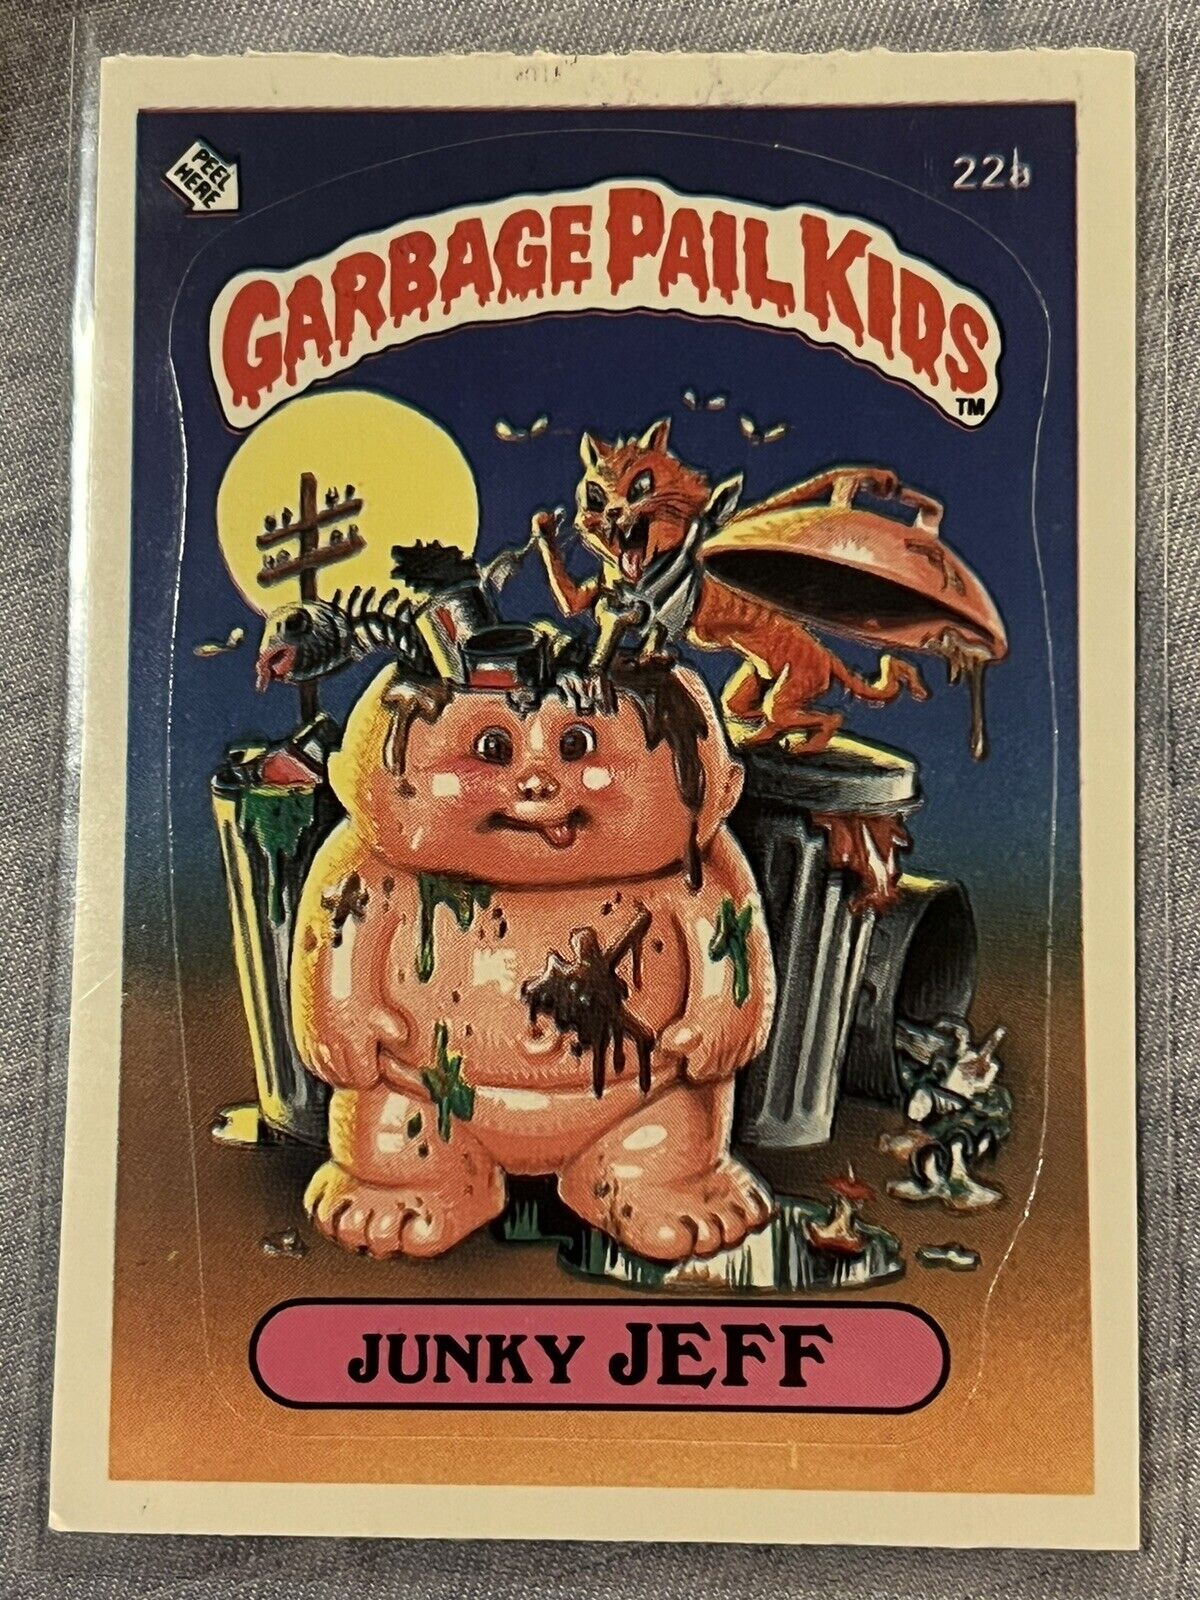 1985 Topps Garbage Pail Kids Series 1 Matte Card 22”b” Junky Jeff One-of-A-Kind